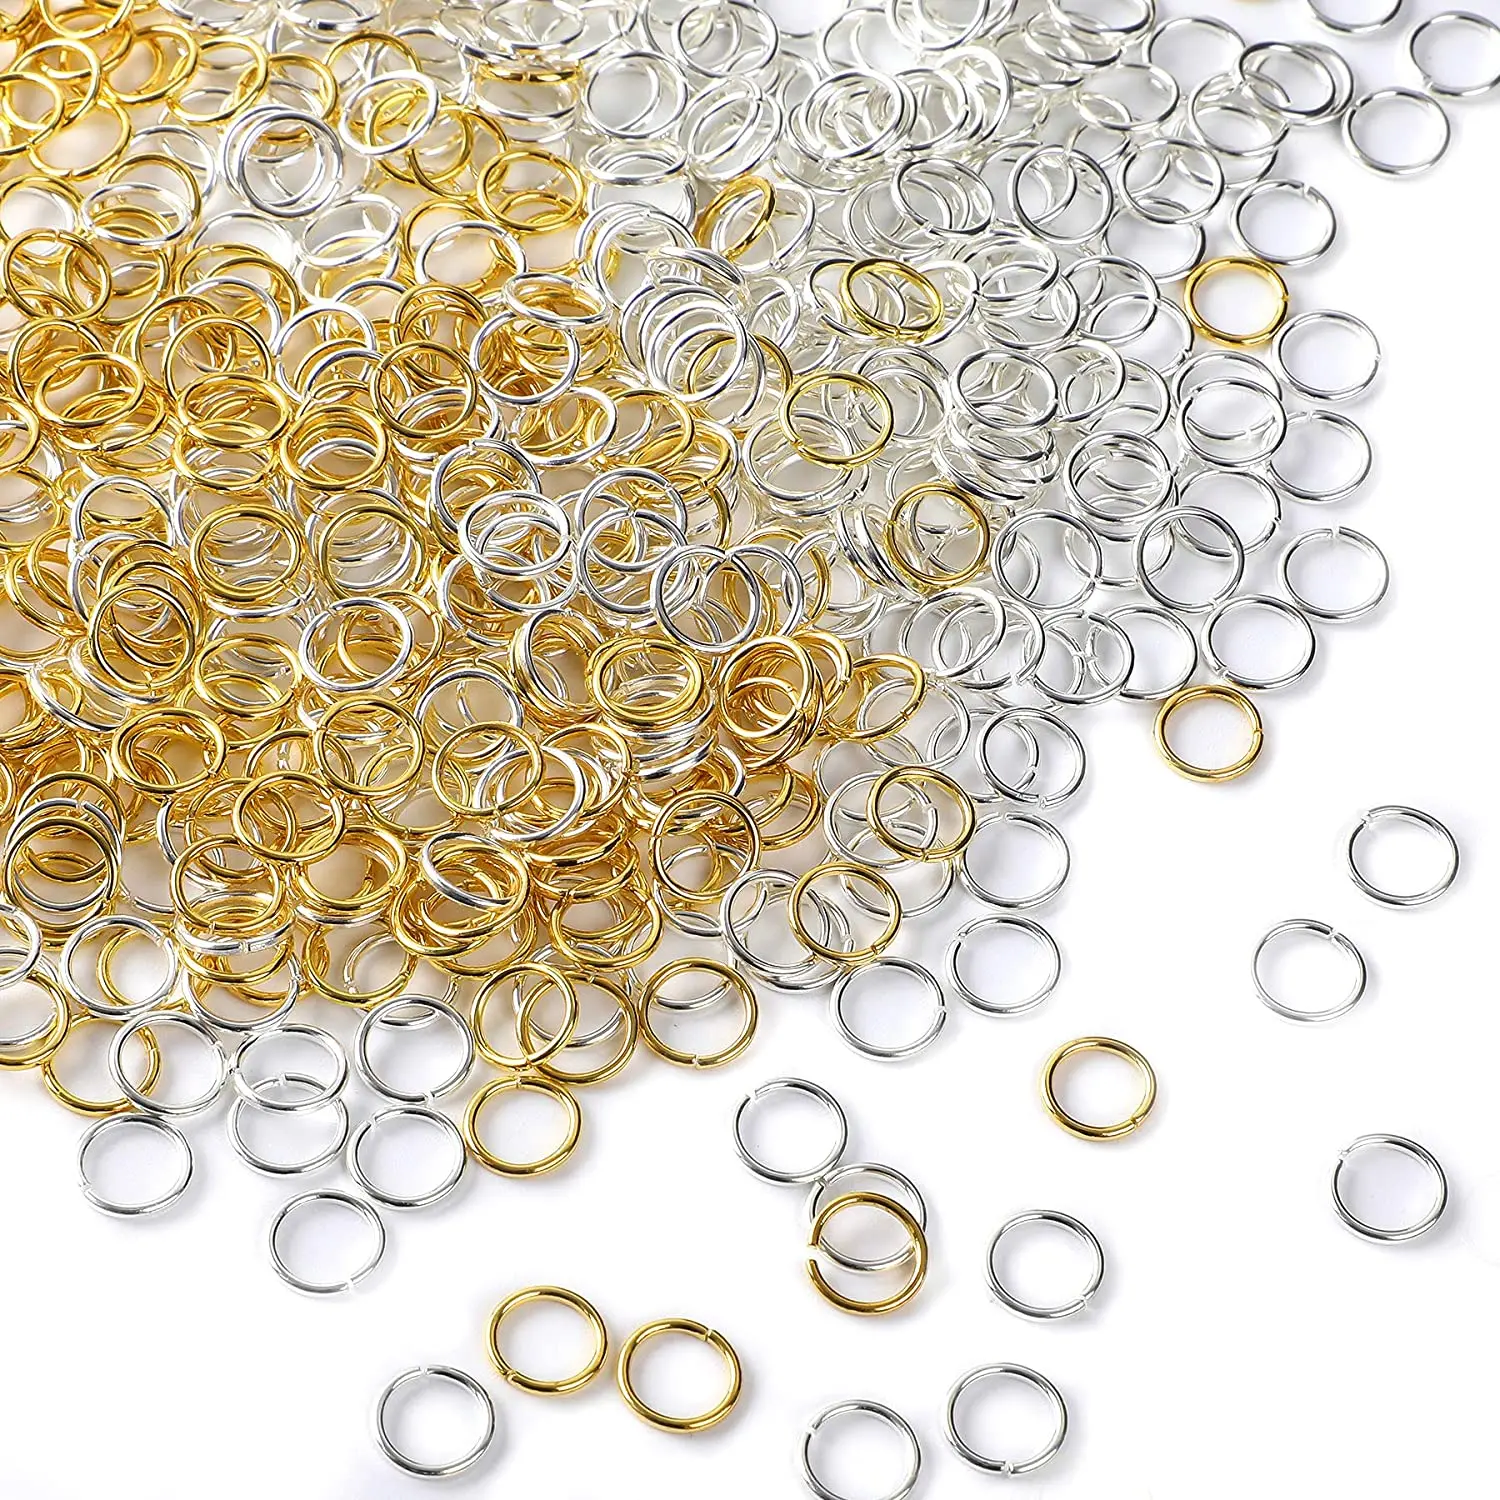 3 4 5 6 7 8 10 12mm 200pcs/lot Metal DIY Jewelry Findings Open Single Loops Jump Rings & Split Ring for Jewelry Making Crafts